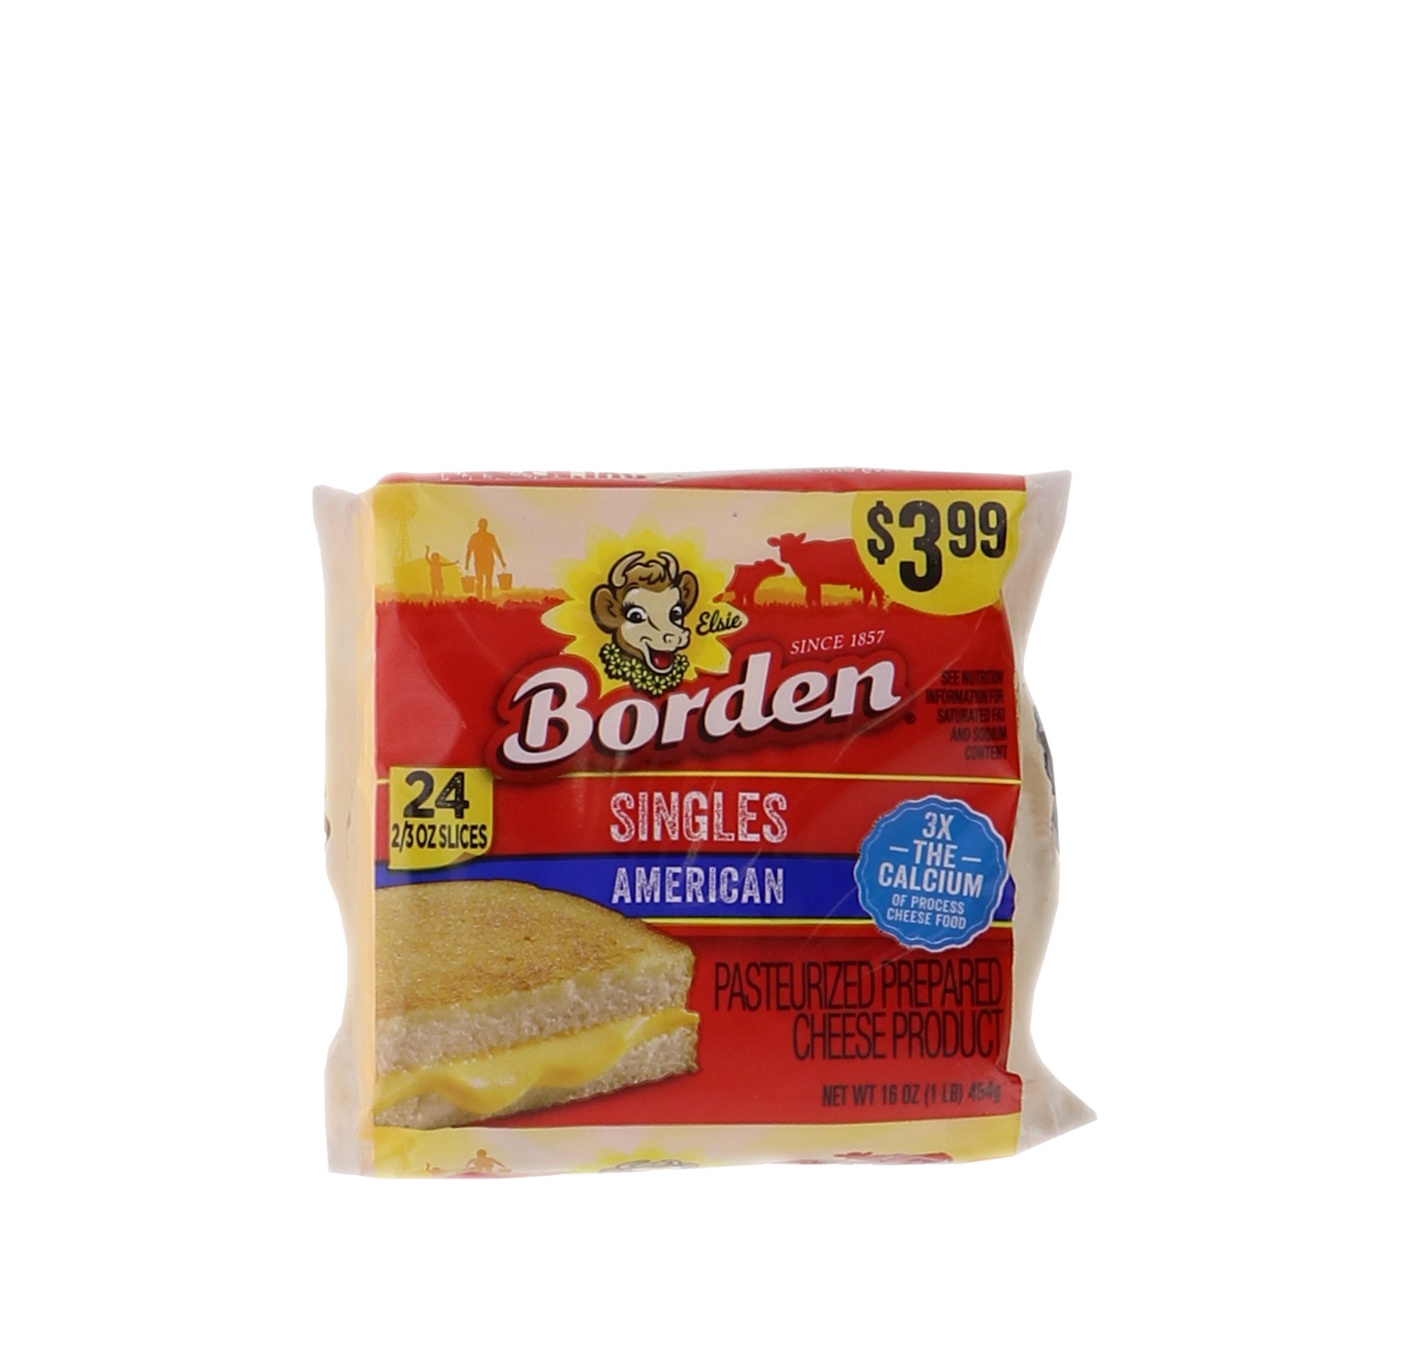 slide 1 of 1, Borden Singles American Pasteurized Prepared Cheese Product, 16 oz